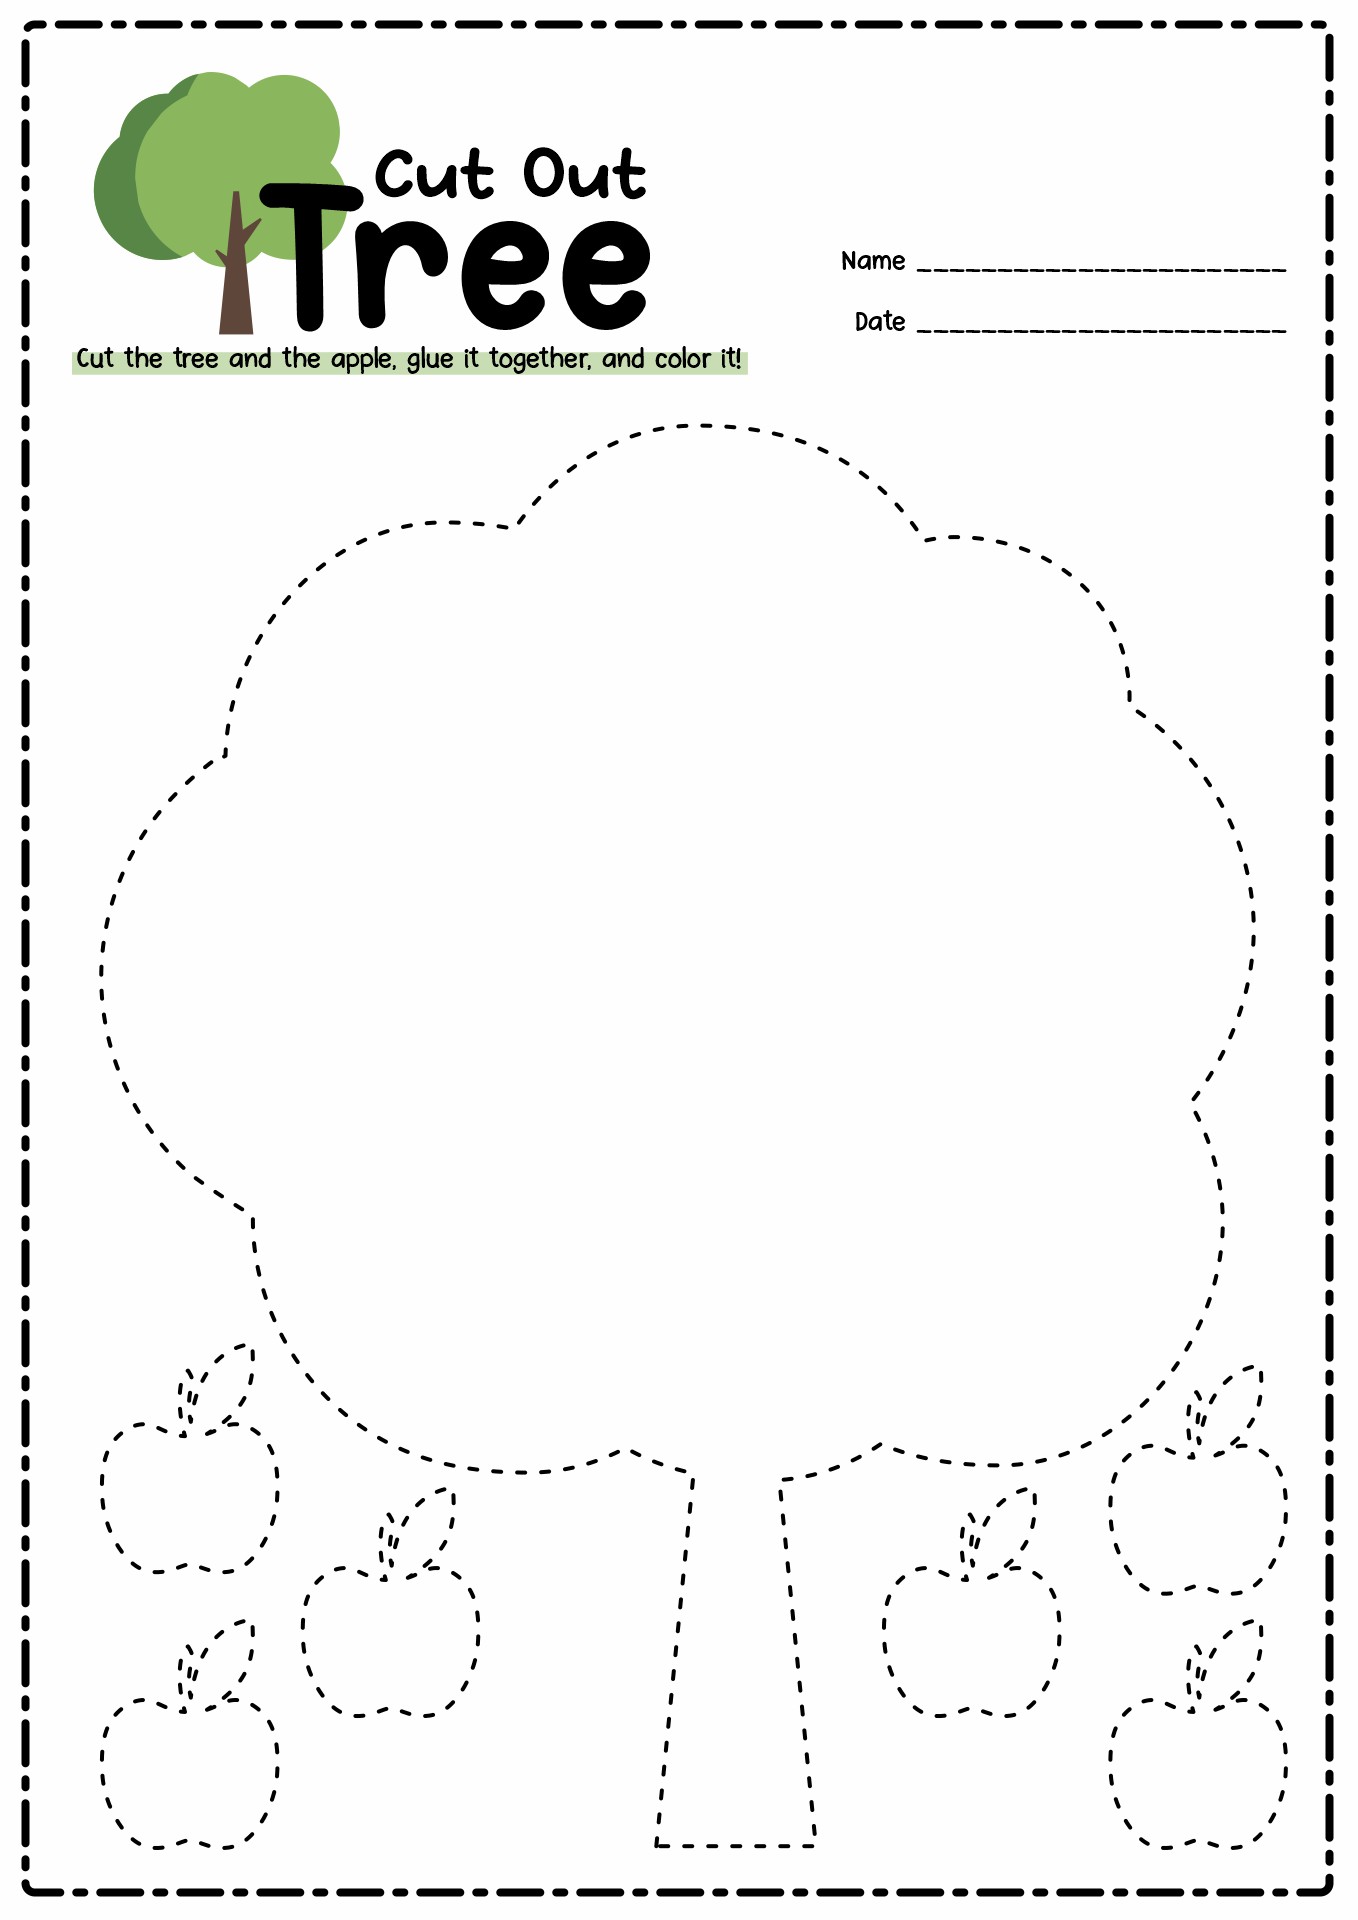 13-best-images-of-preschool-worksheets-cutting-practice-tree-cut-out